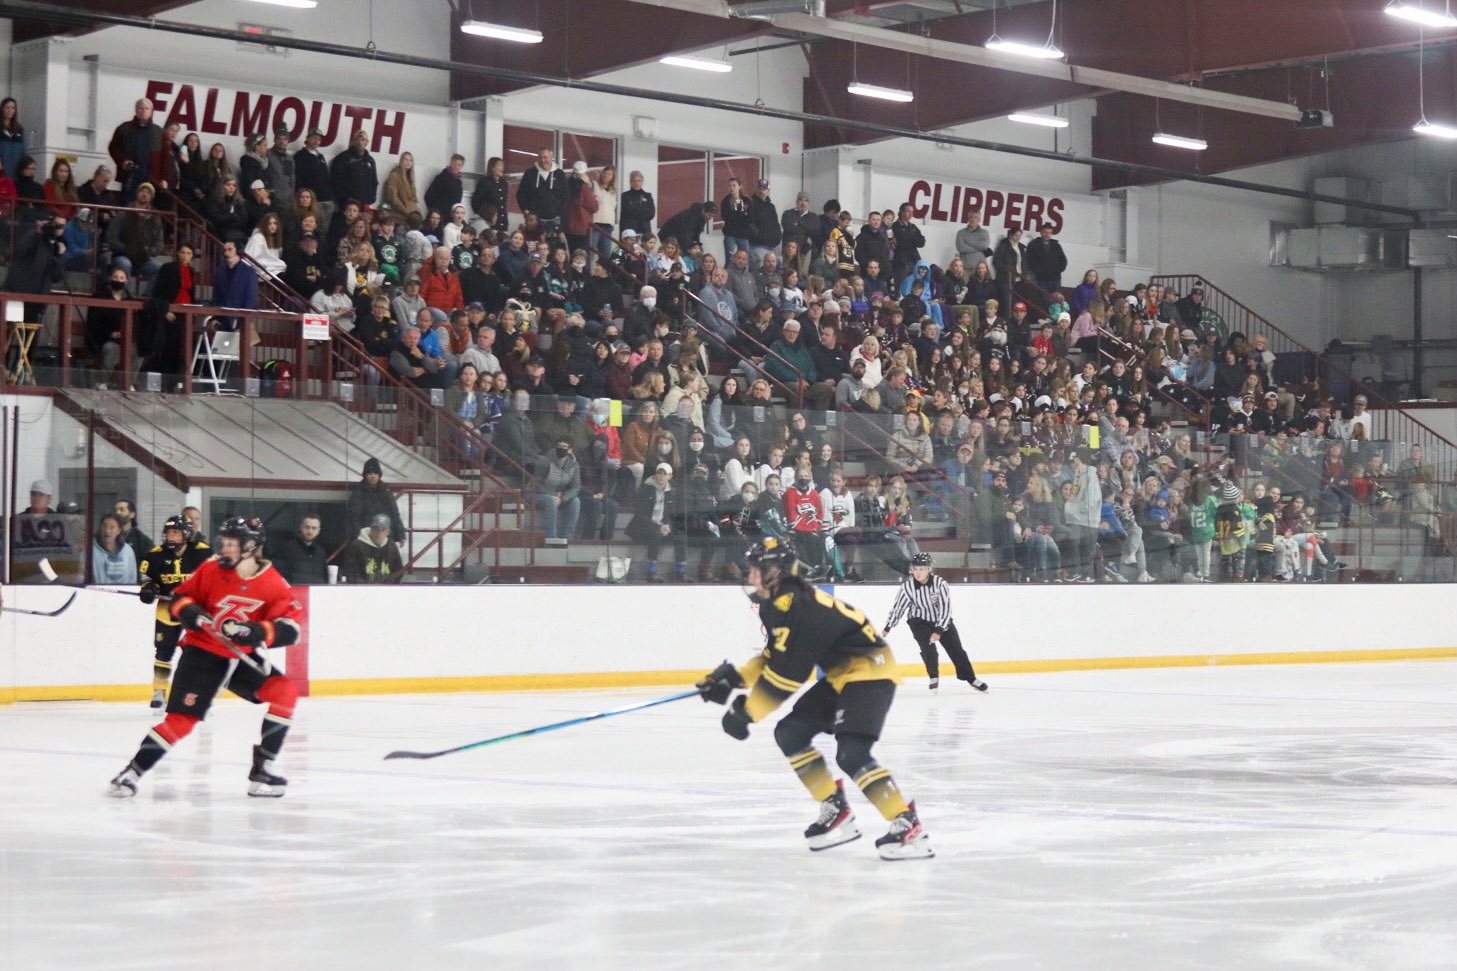 A capacity crowd at Falmouth Ice Arena on hand to cheer on Toronto and Boston